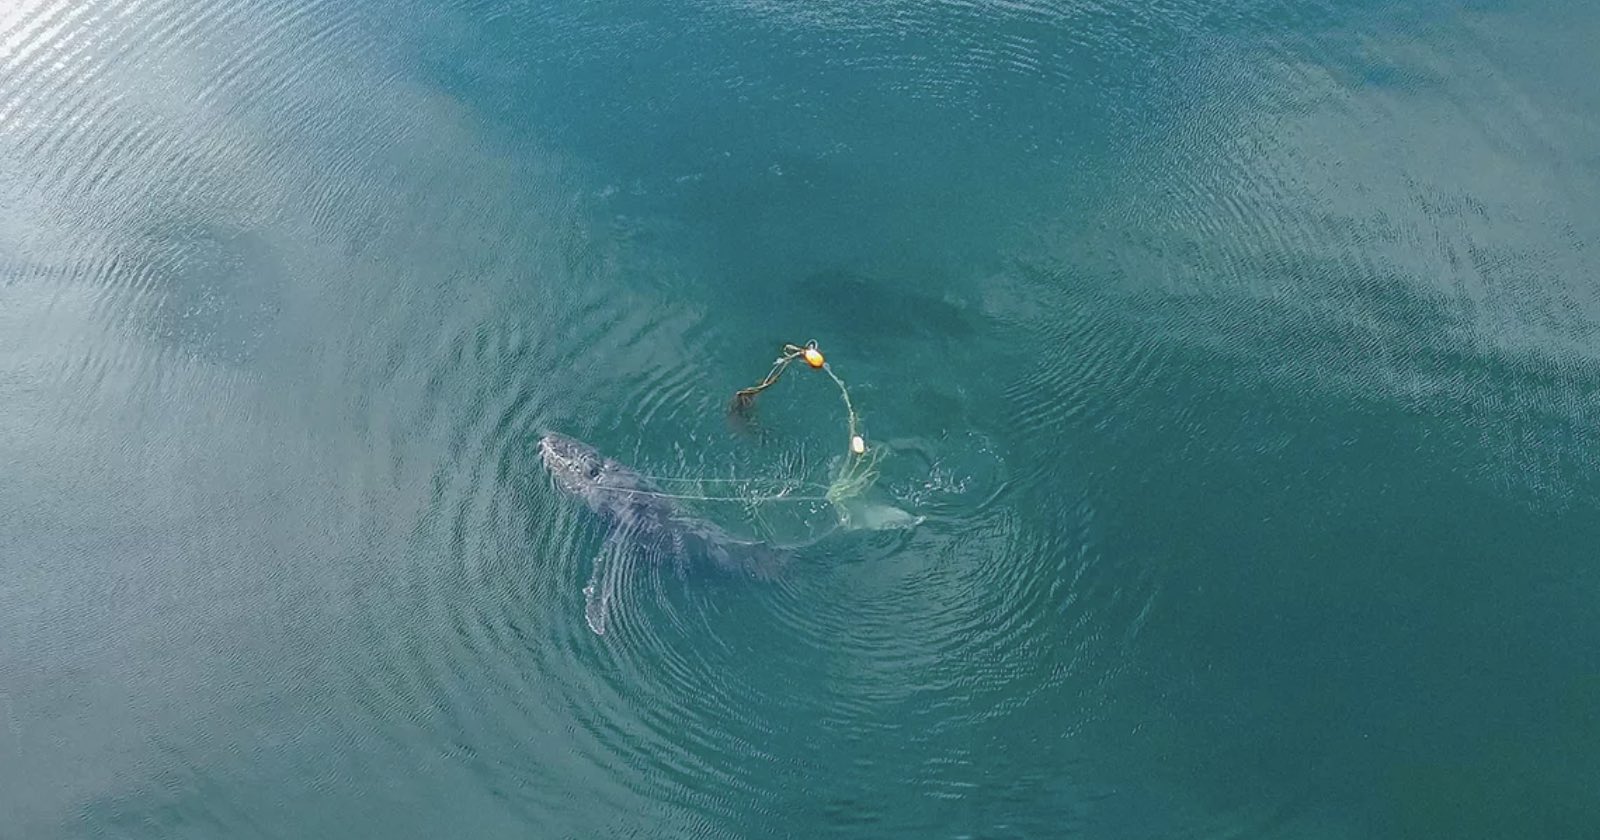 Drone Captures Moment Humpback Whale is Freed From 300lb Crab Pot